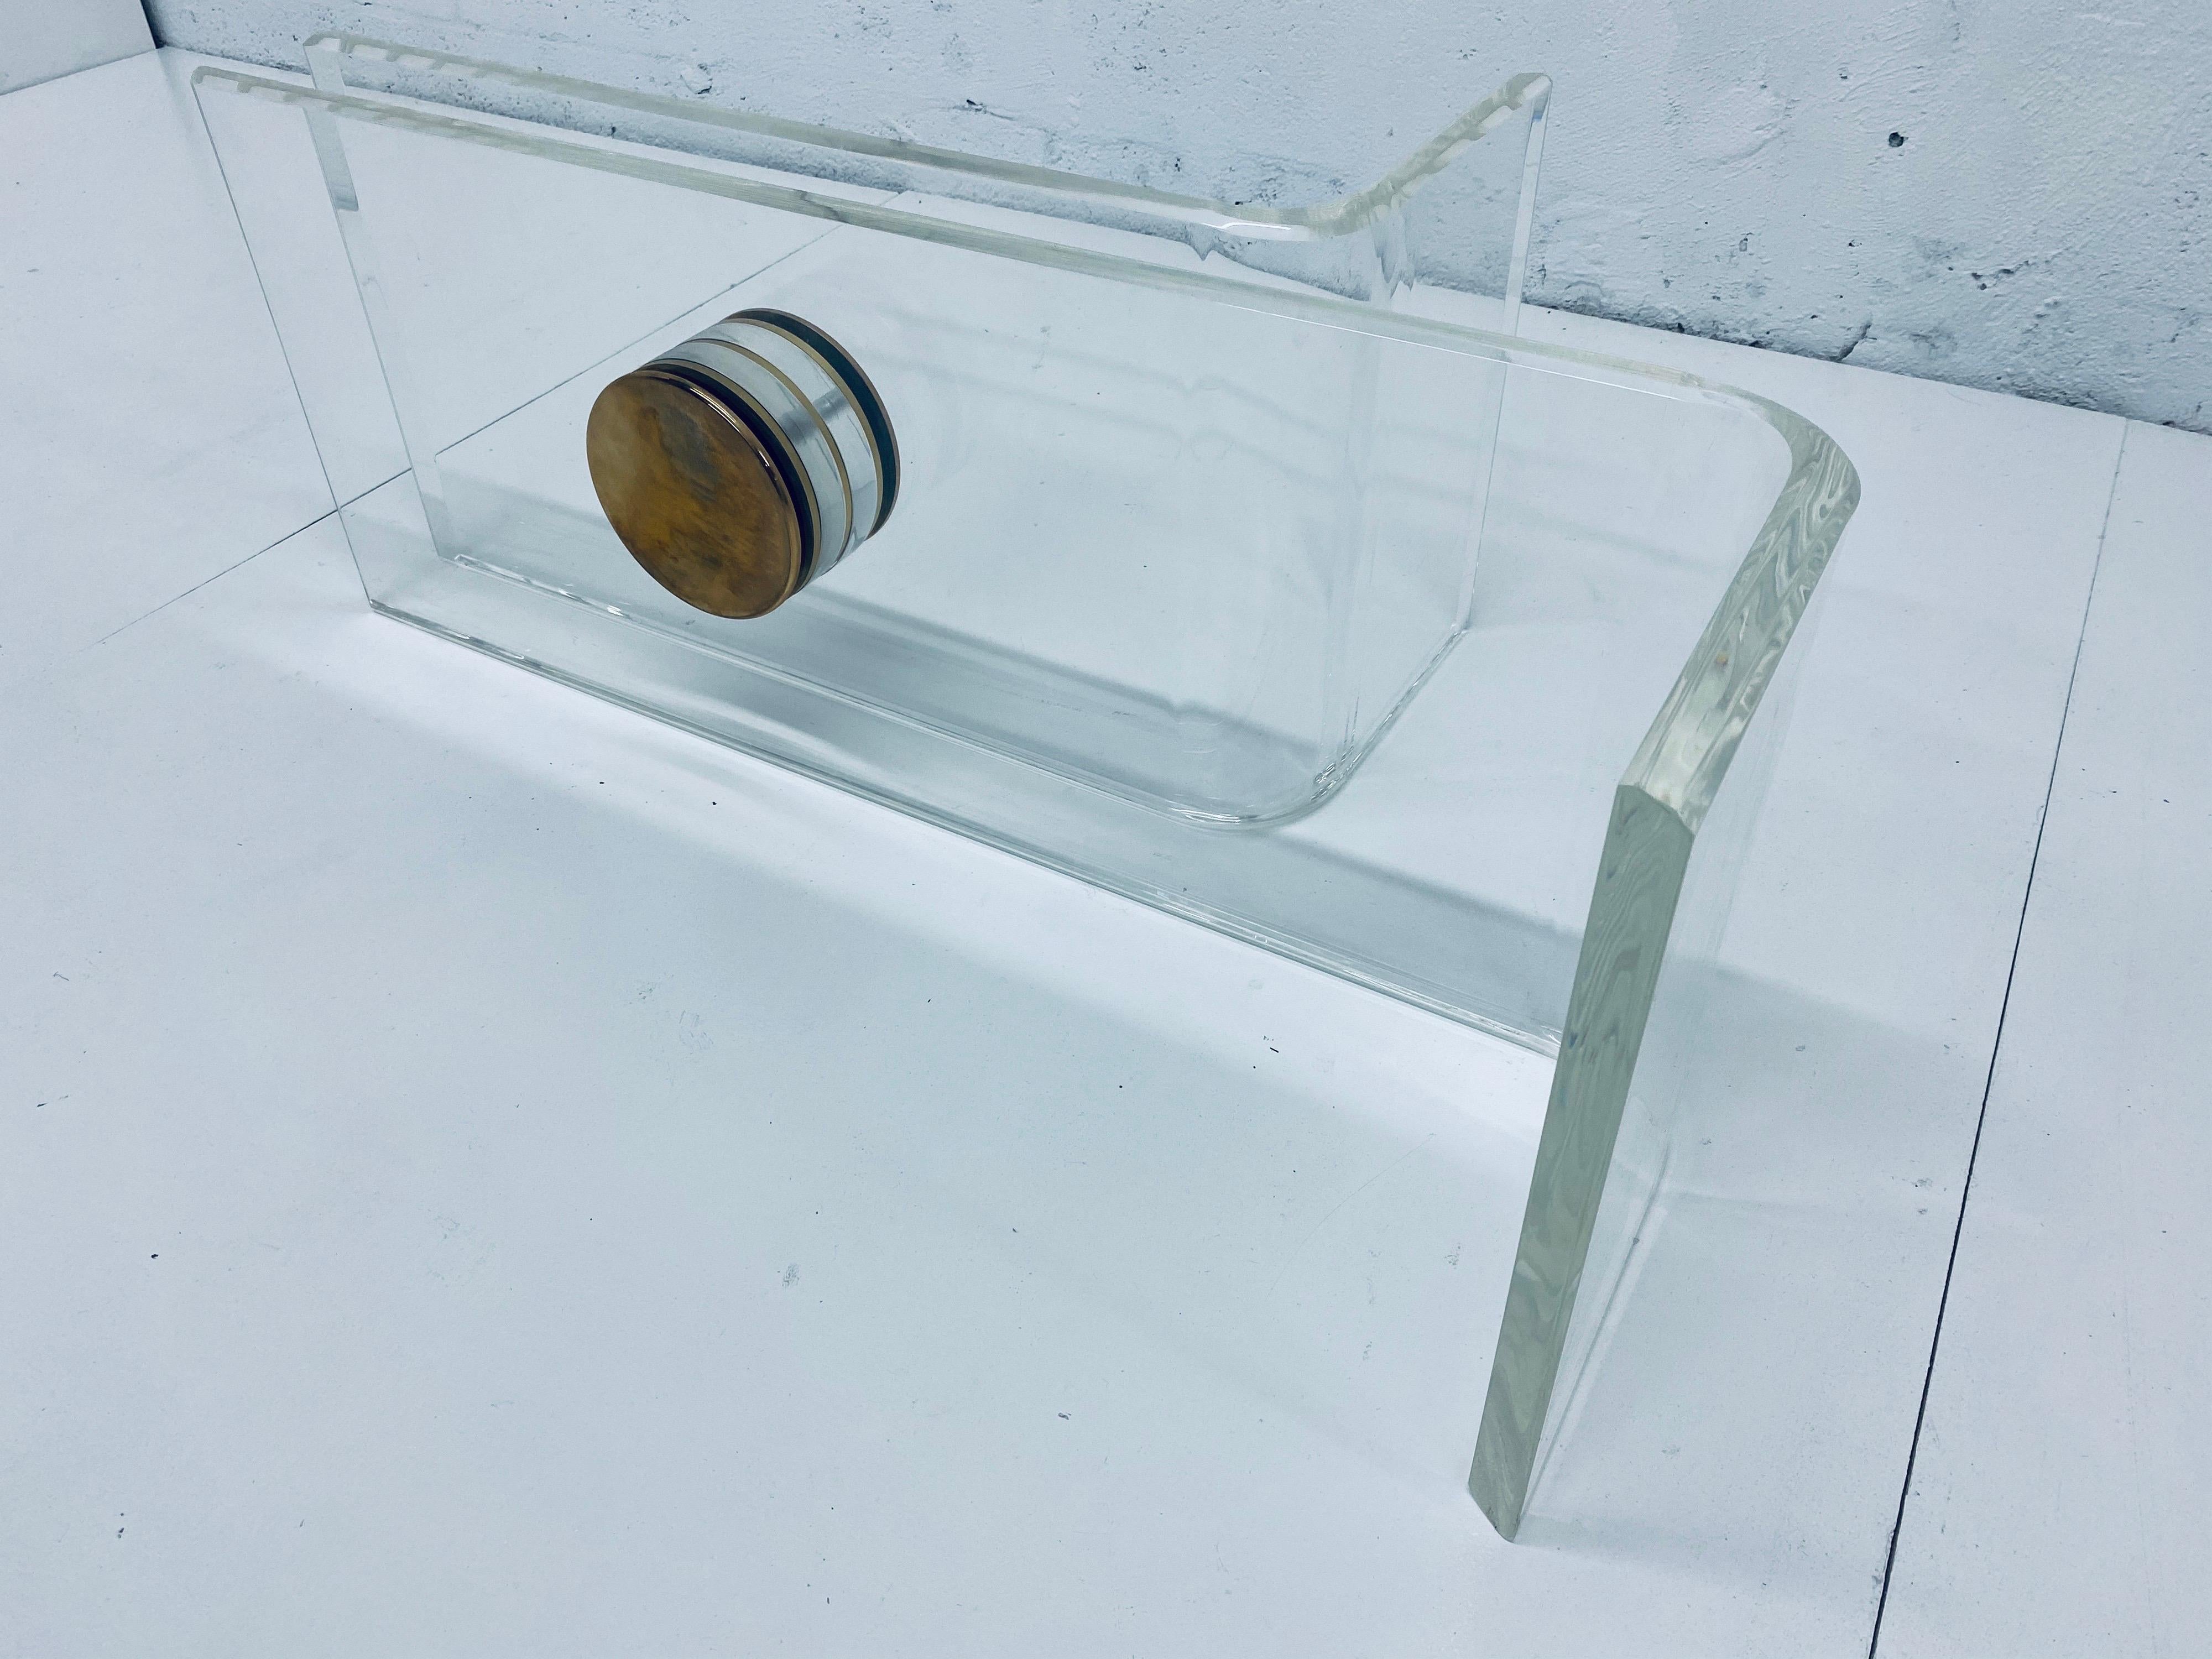 Sculptural lucite curved base with large brass caps coffee table base attributed to Karl Springer. One lucite piece is longer than the other. Table does not come with glass top (last image show what a larger glass top would look like with; 60